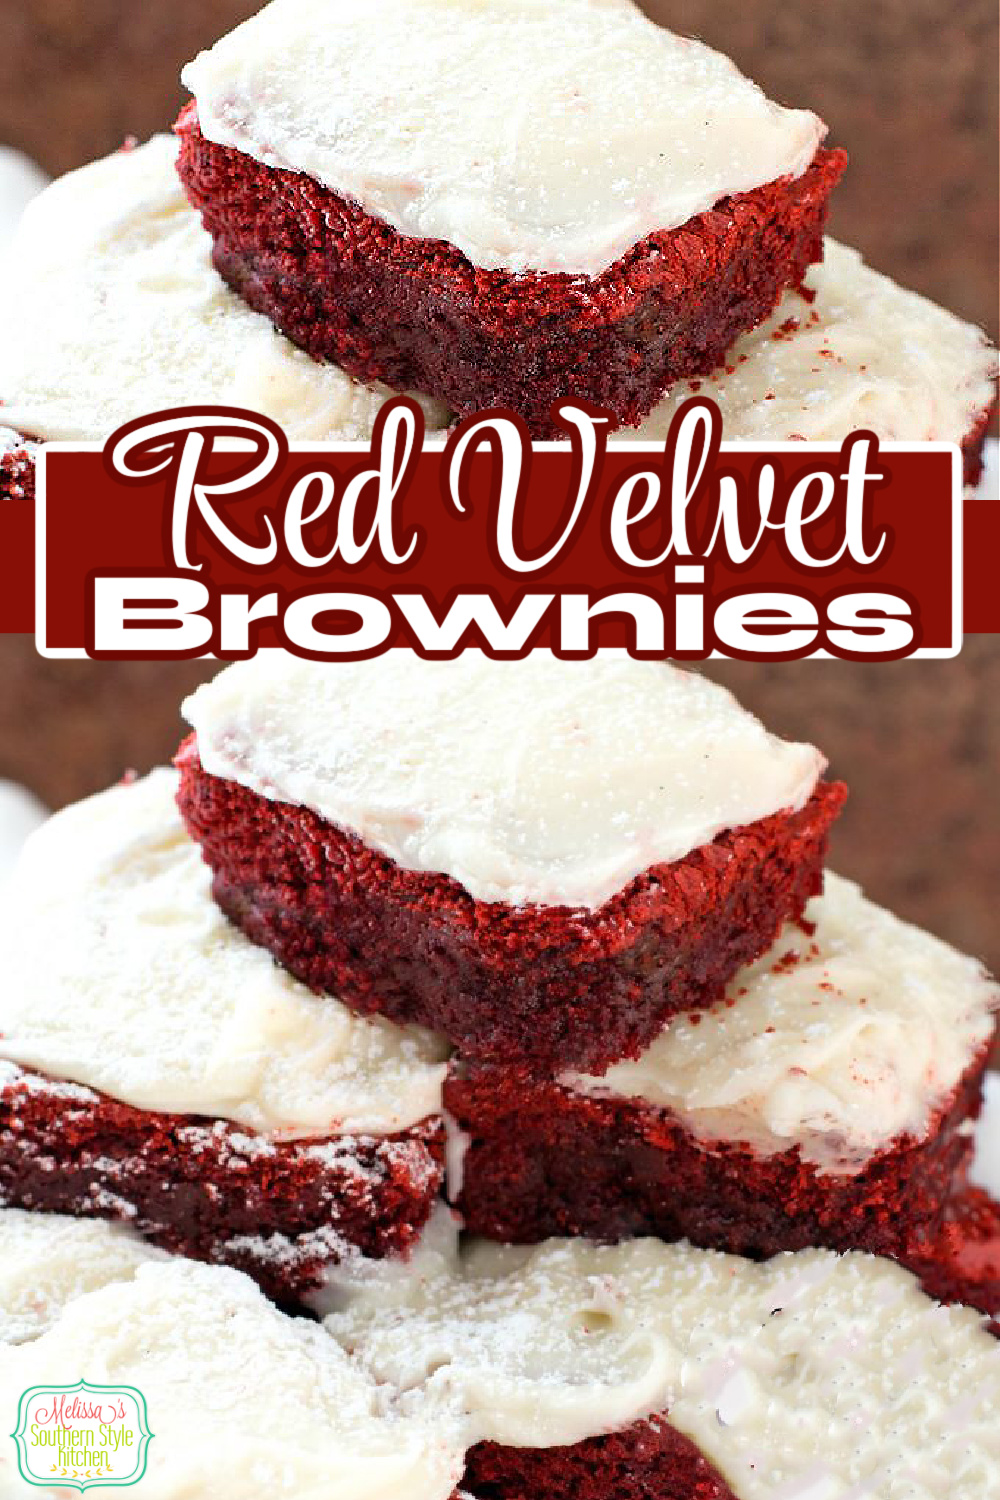 These scratch made cream cheese Frosted Red Velvet Brownies are rich and fudgy and simple to make! #redvelvetbrownies #brownies #browniesrecipes #redvelvetdesserts #browniesrecipes #homemadebrownies #creamcheesefrosting via @melissasssk